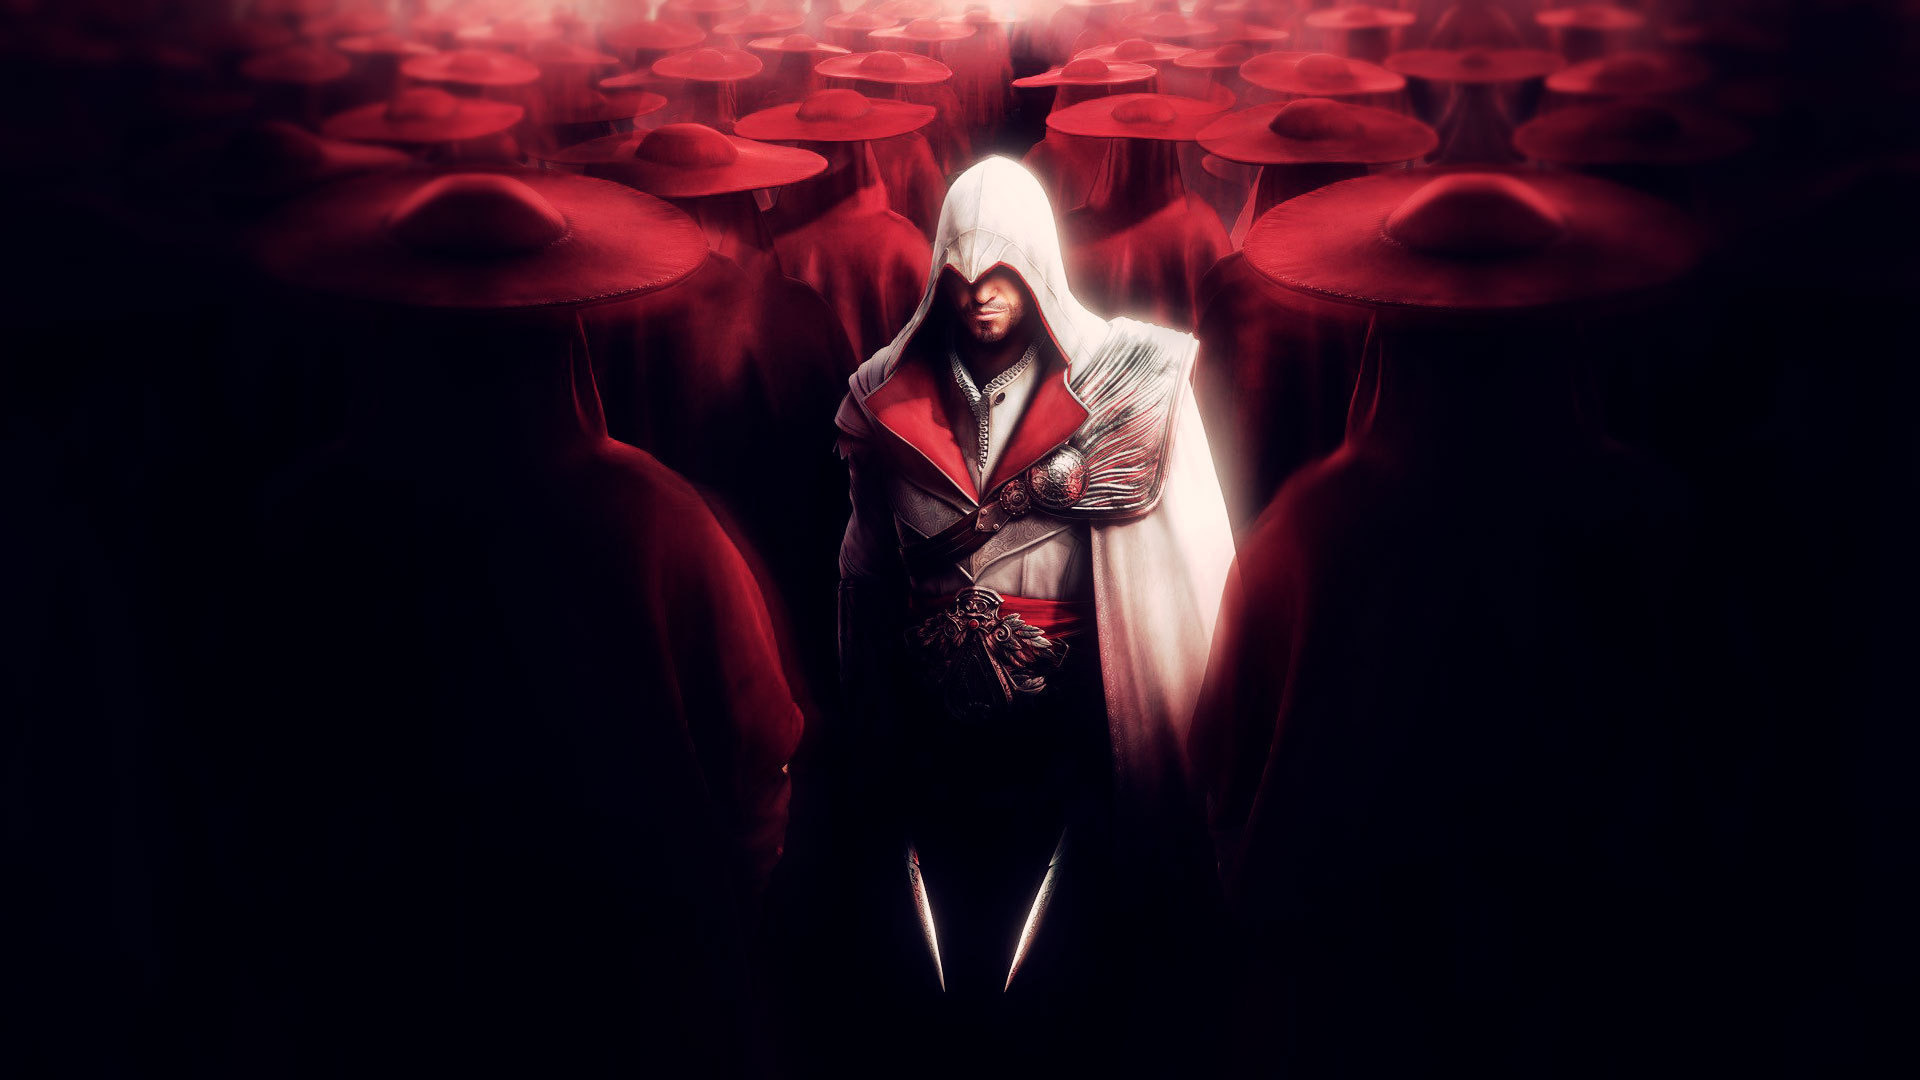 Assassin S Creed Brotherhood Wallpapers Pictures Images